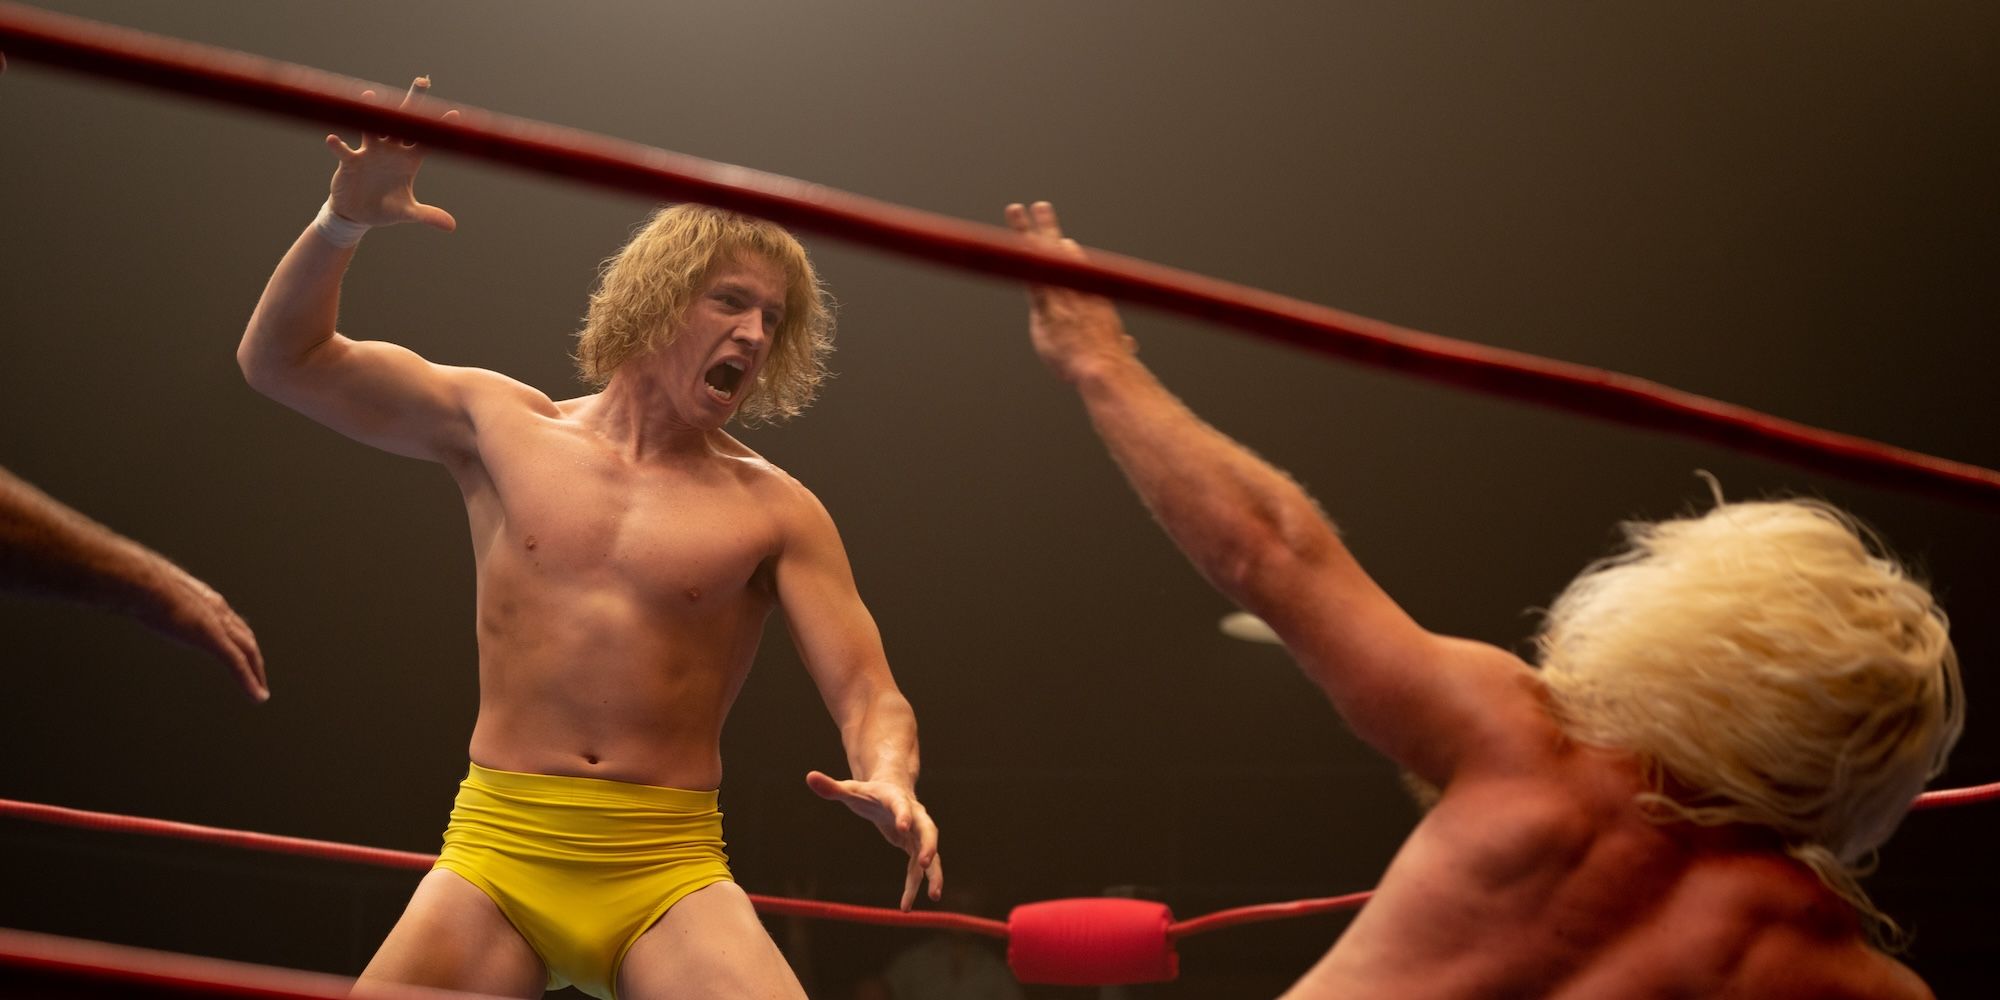 david fights a wrestler in the iron claw